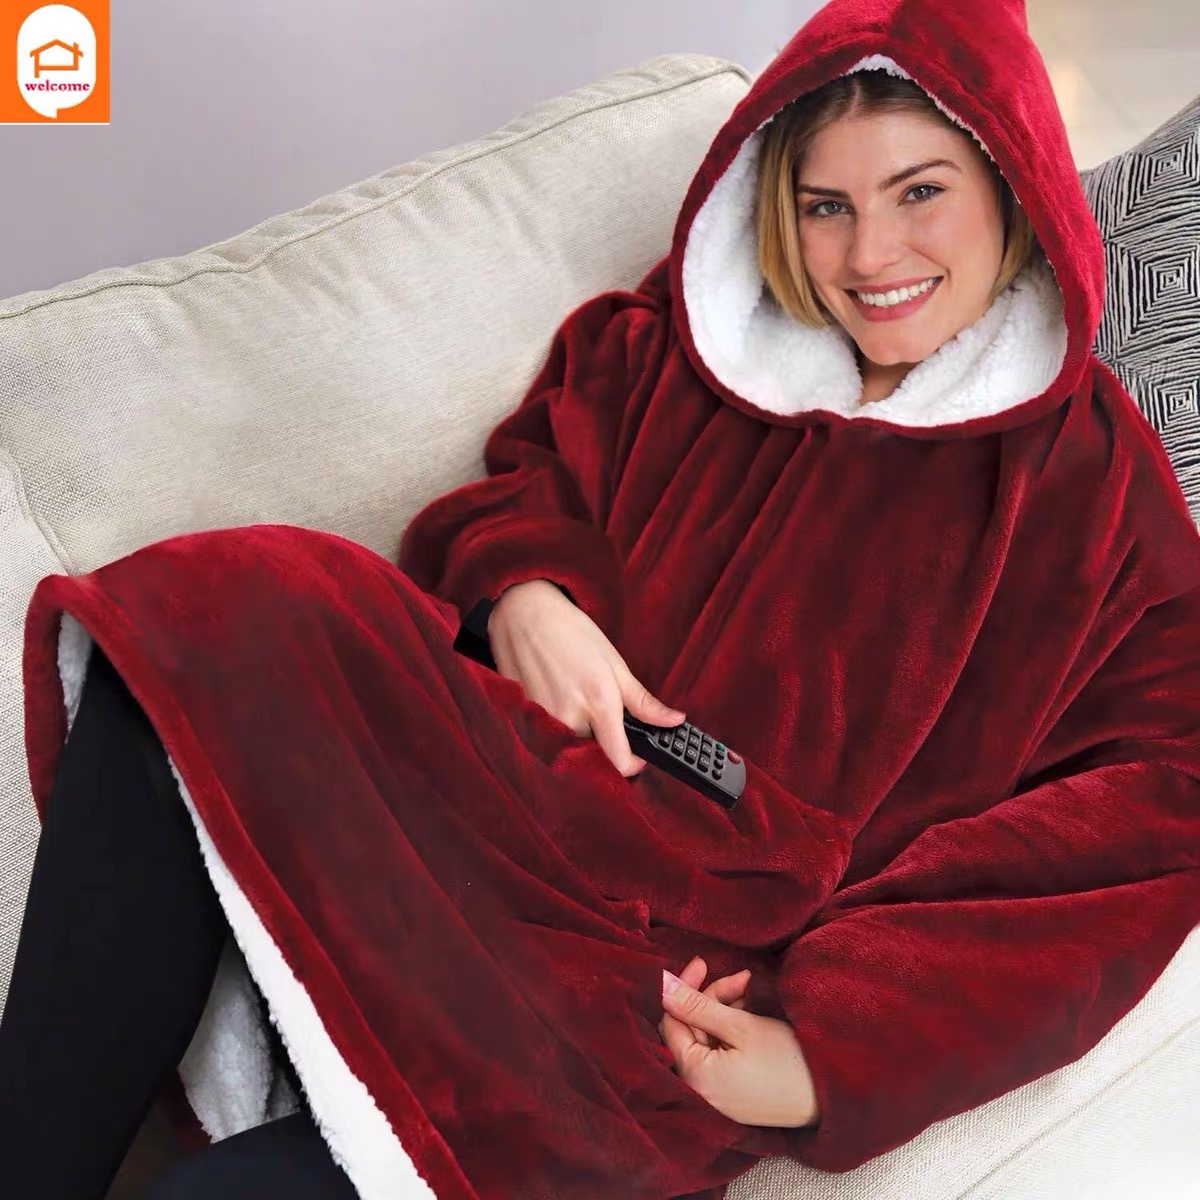 TV New Lazy Man Pullover TV Blanket Hooded Brushed Fleece Warm Clothes Home Clothes Nightgown Outdoor Anti Cold Clothing Sweater